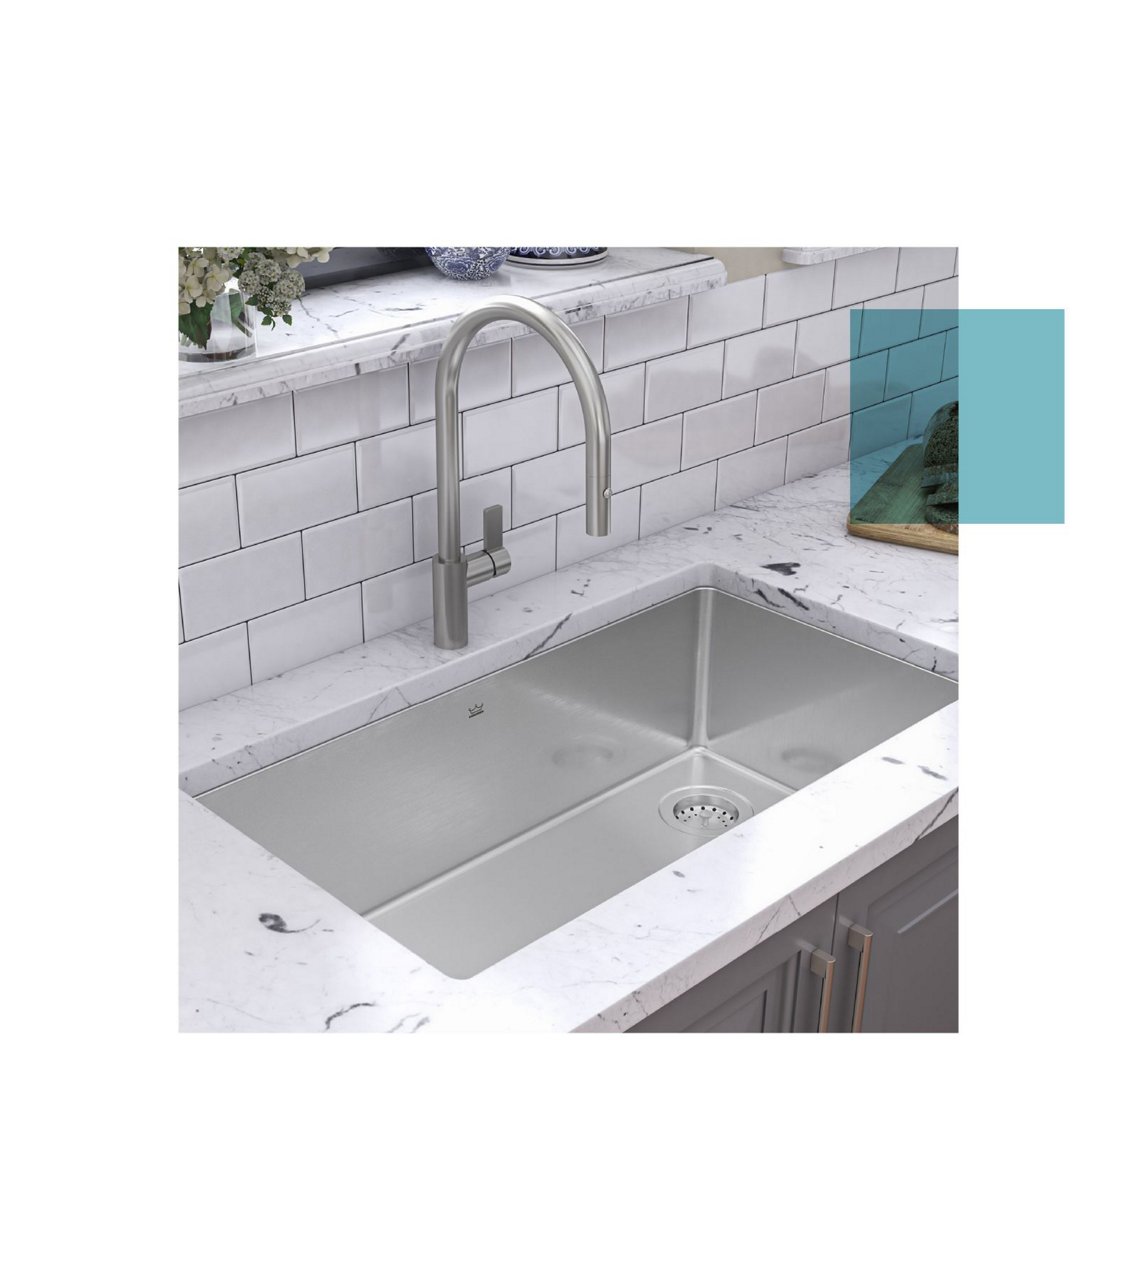 Large stainless steel single bowl undermount kitchen sink with a stainless steel faucet